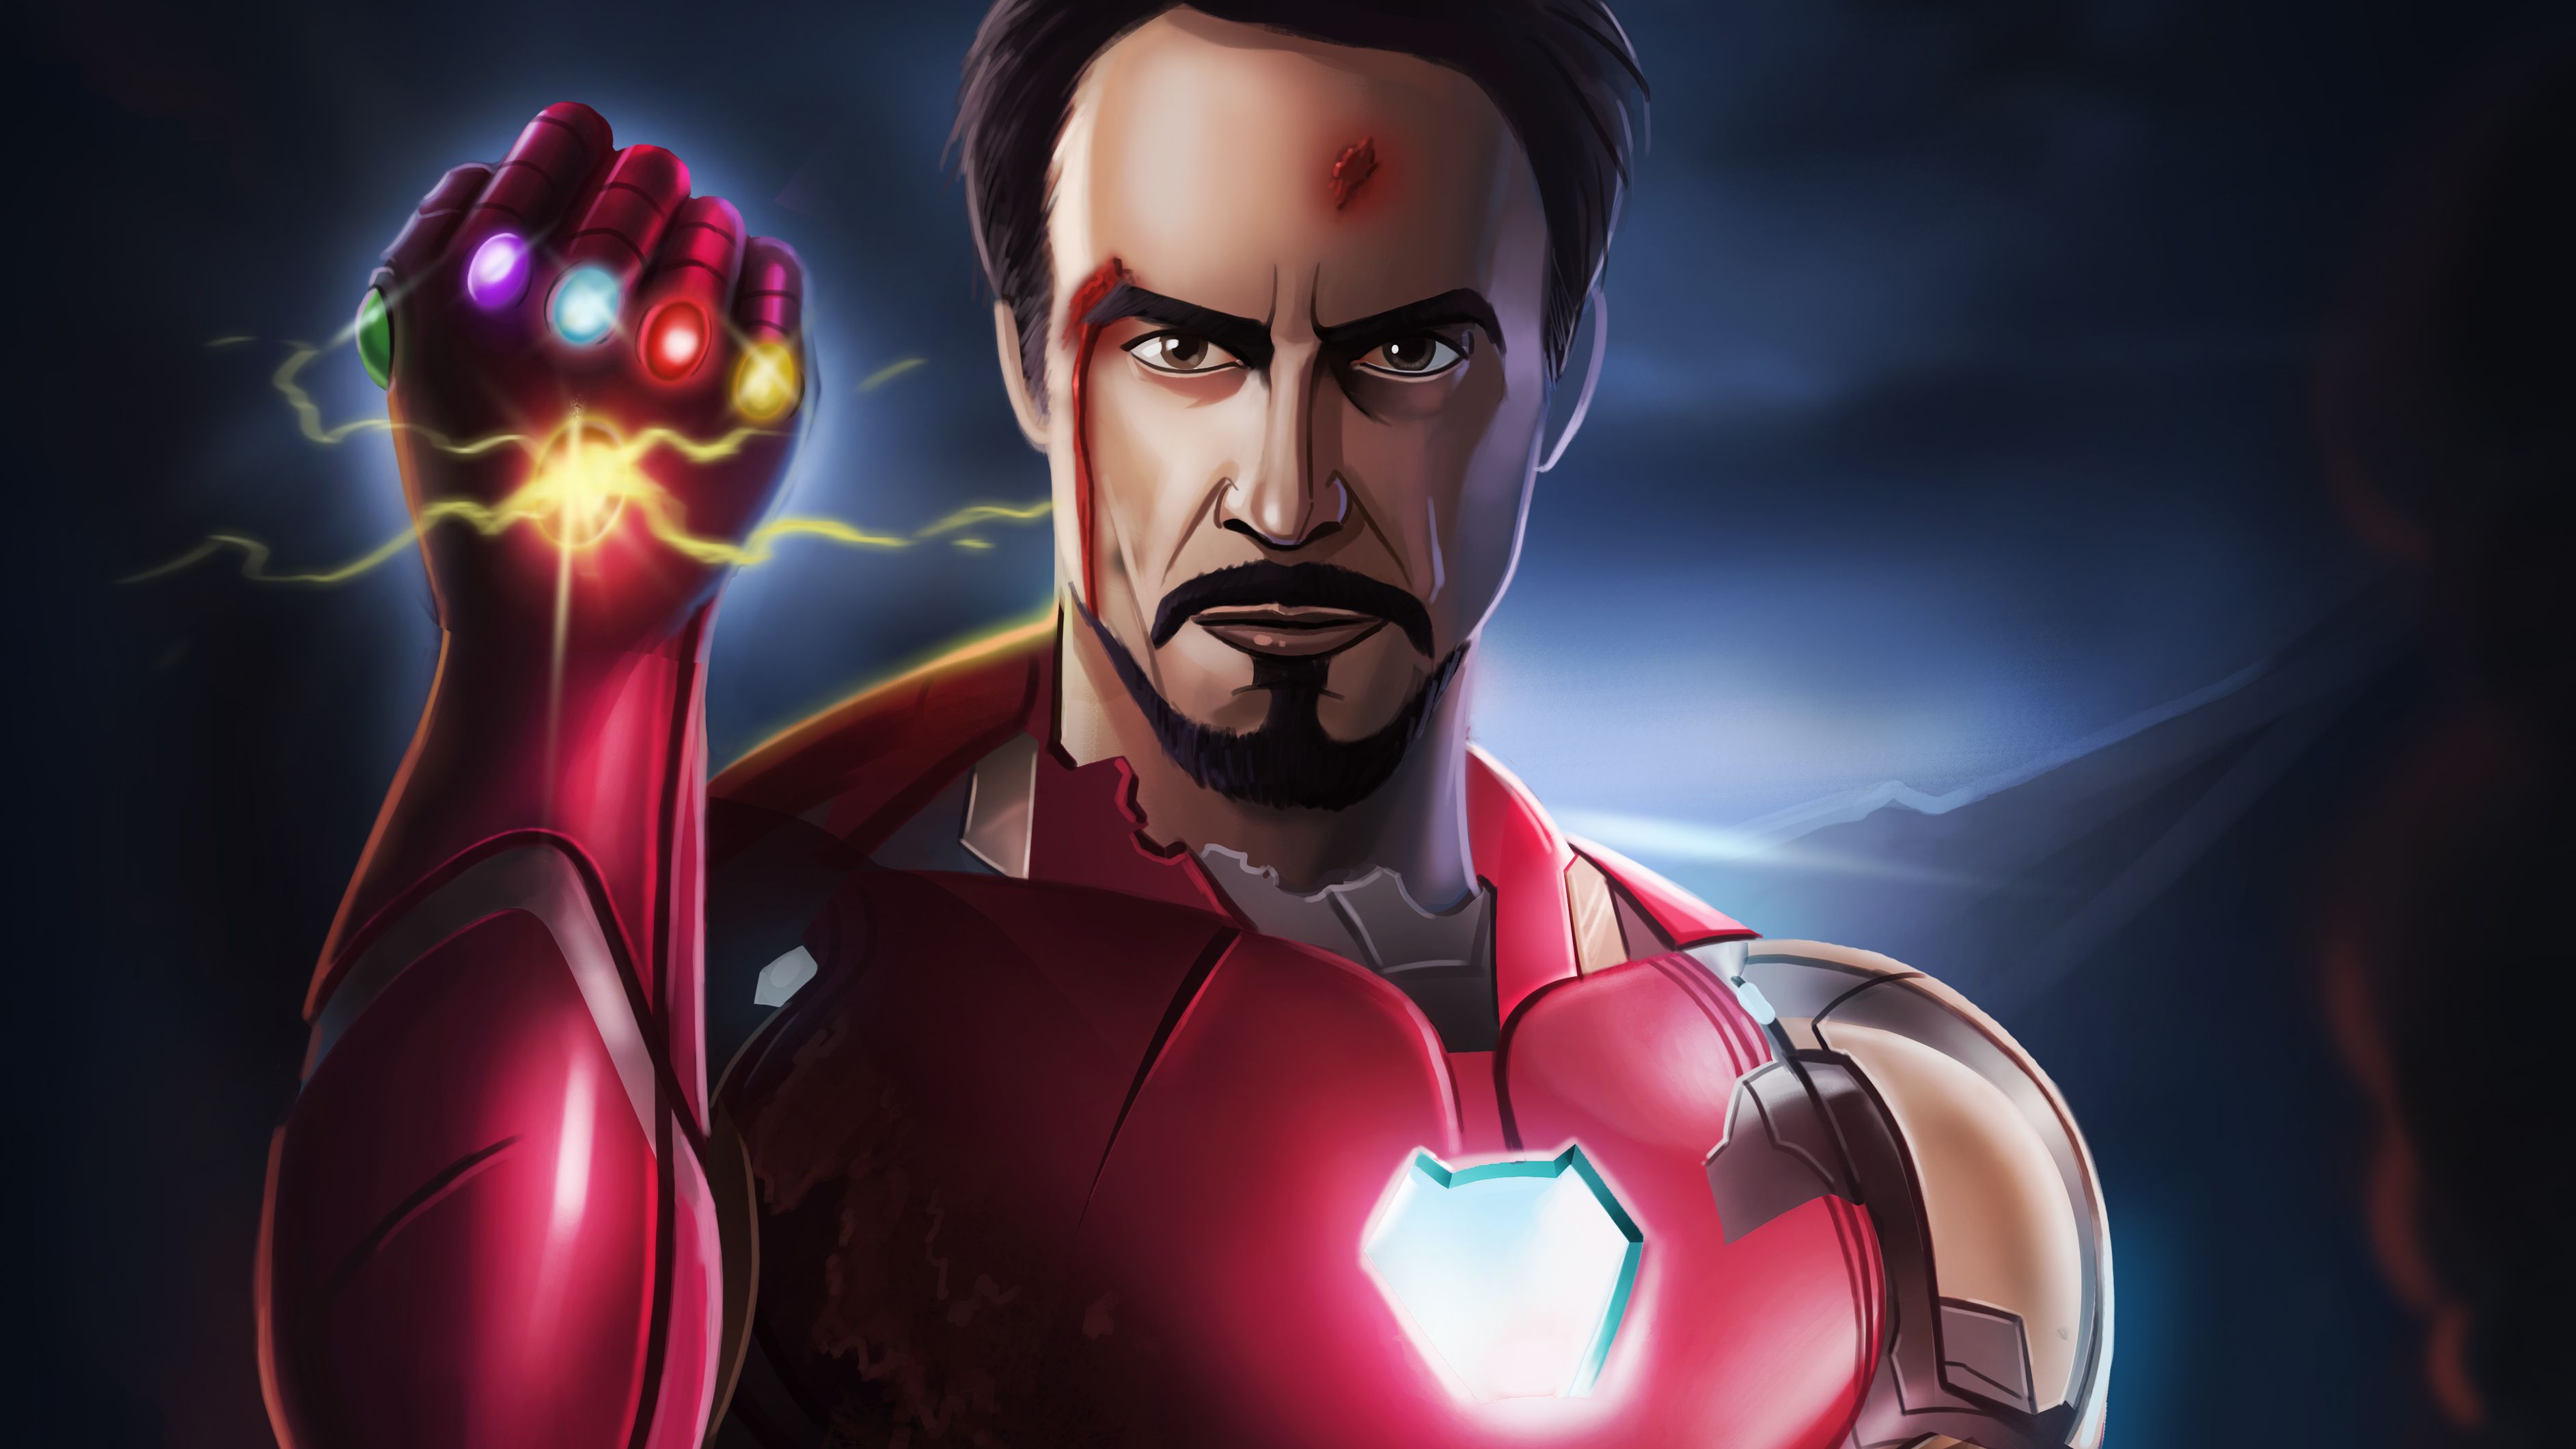 Iron Man MK 50 Animated iPhone Wallpaper - iPhone Wallpapers